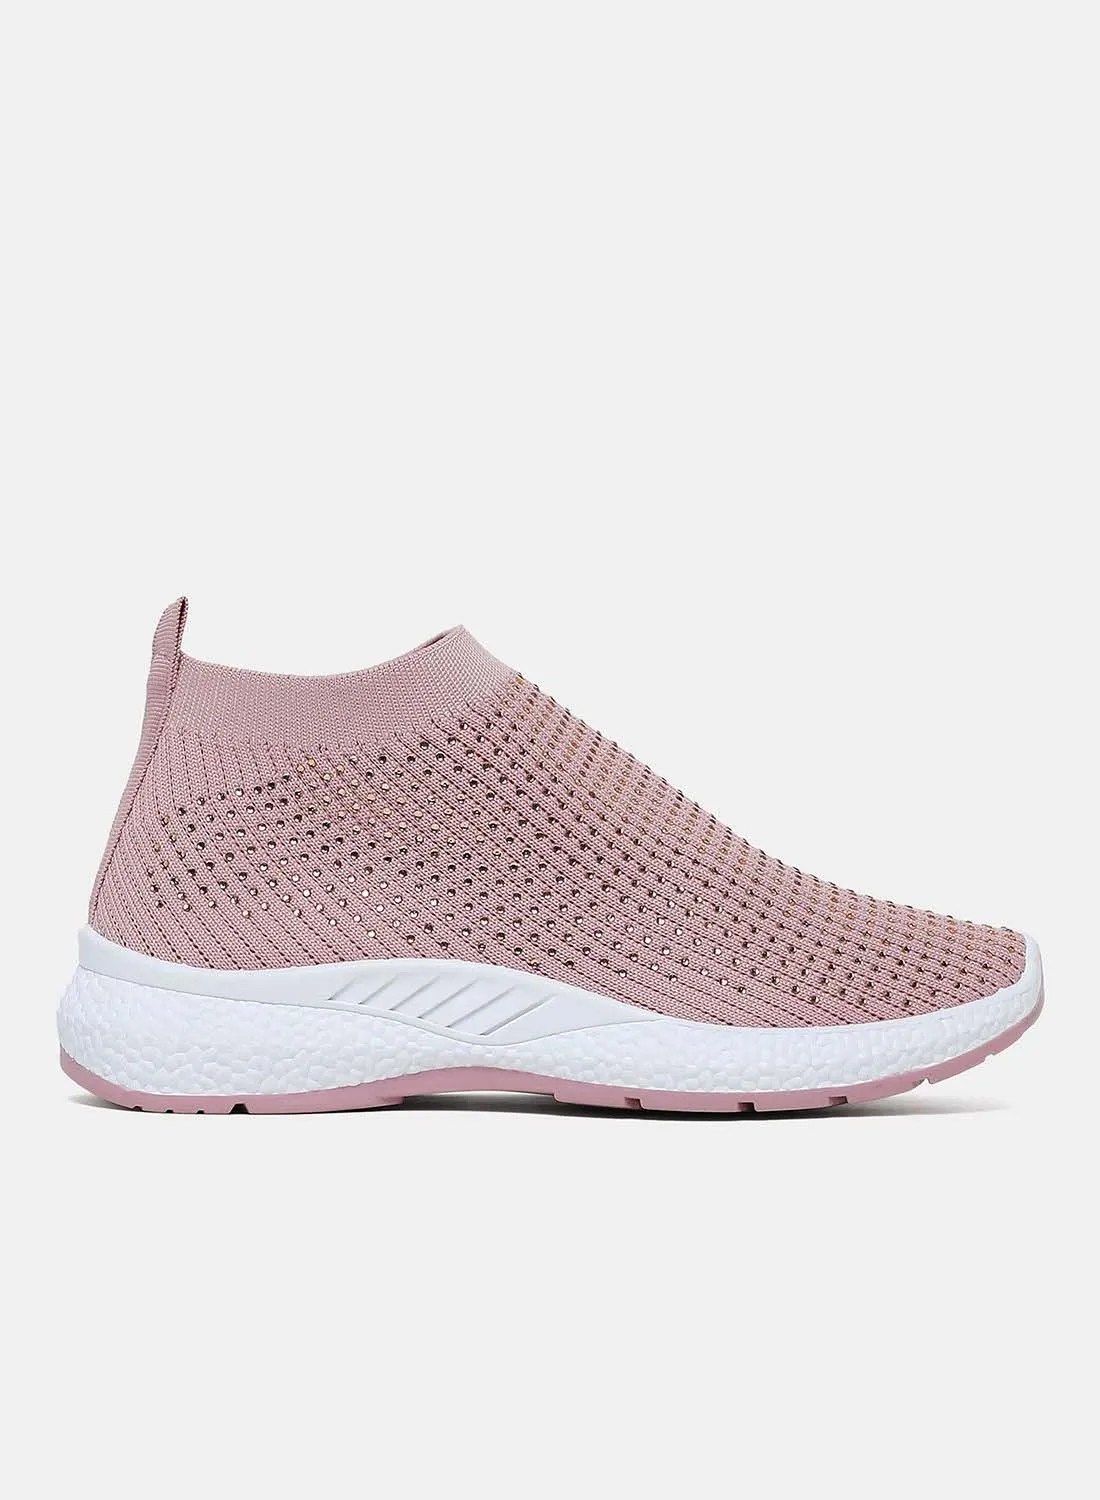 Athletiq Casual High Top Sneakers Light Pink